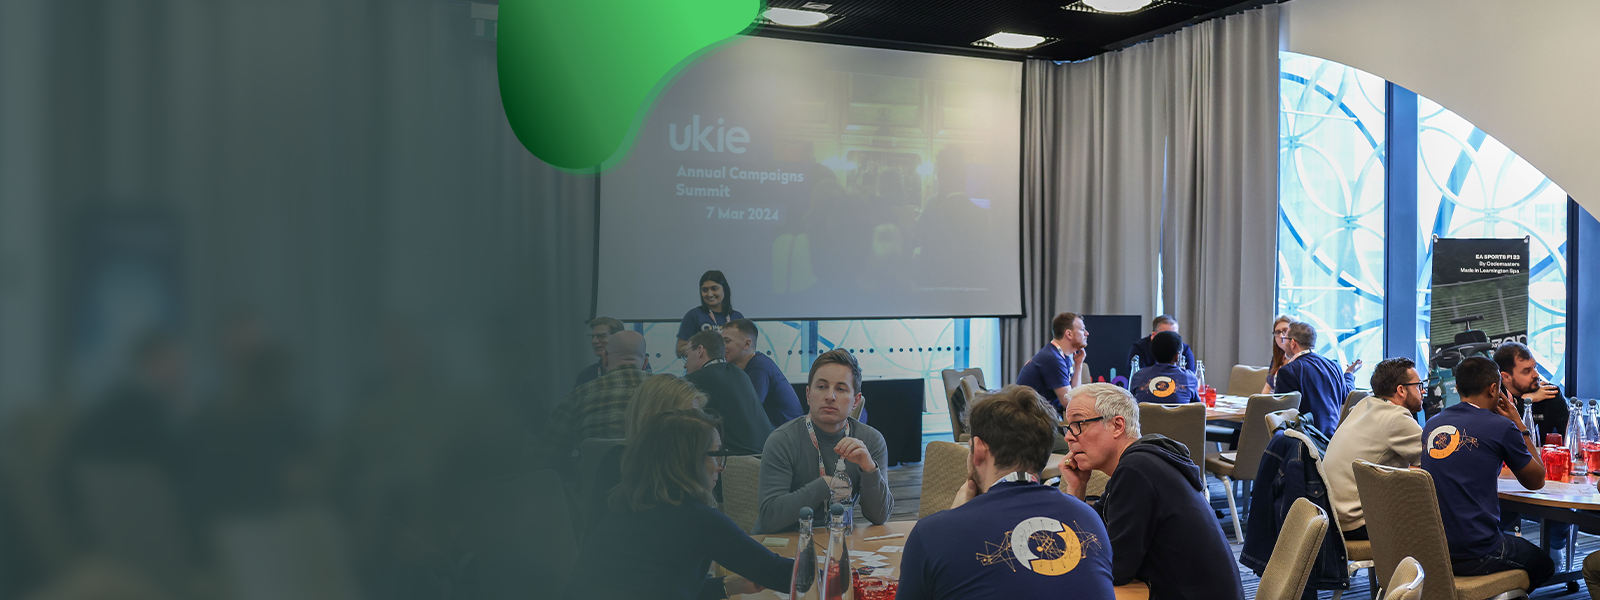 Photo of the Ukie Annual Campaigns Summit 2024, with event attendees in discussion around multiple conference tables